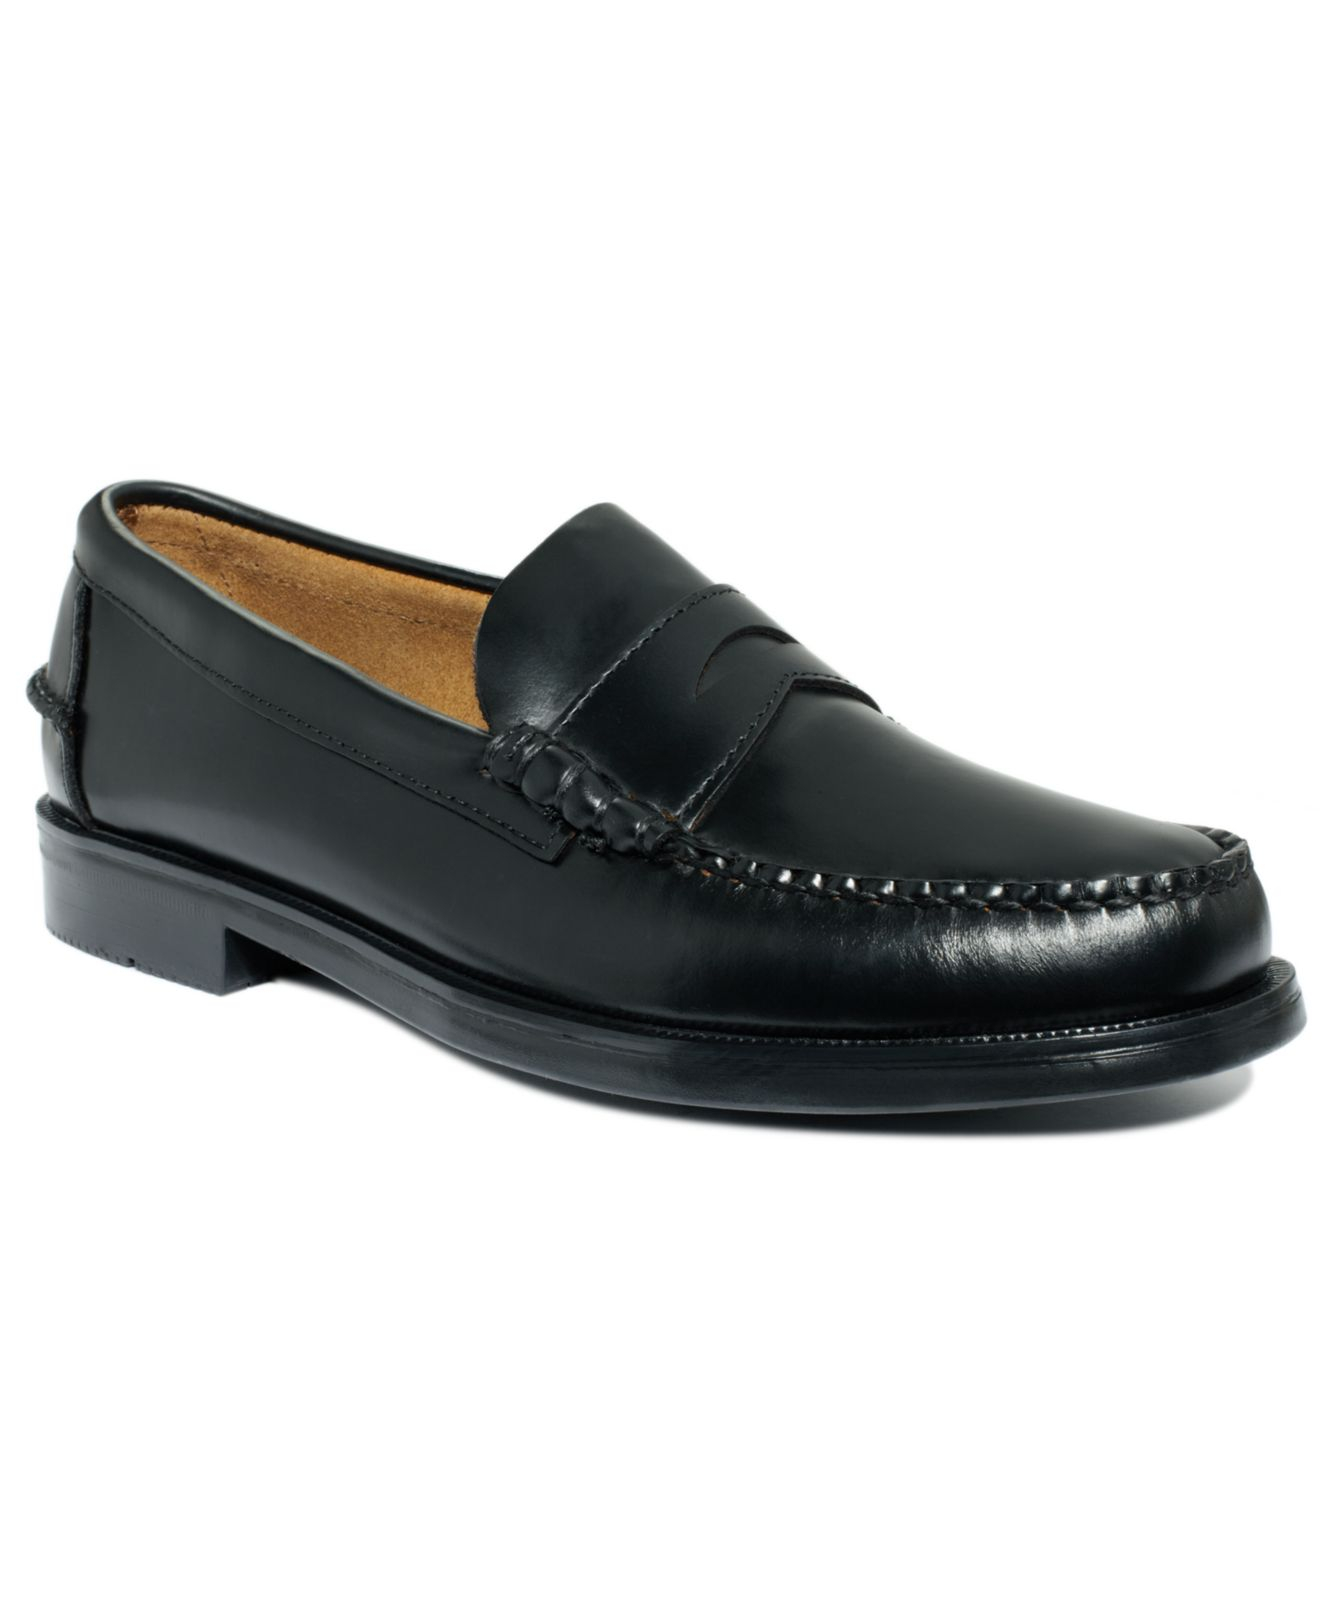 Lyst - Sebago Grant Beef Roll Penny Loafers in Black for Men